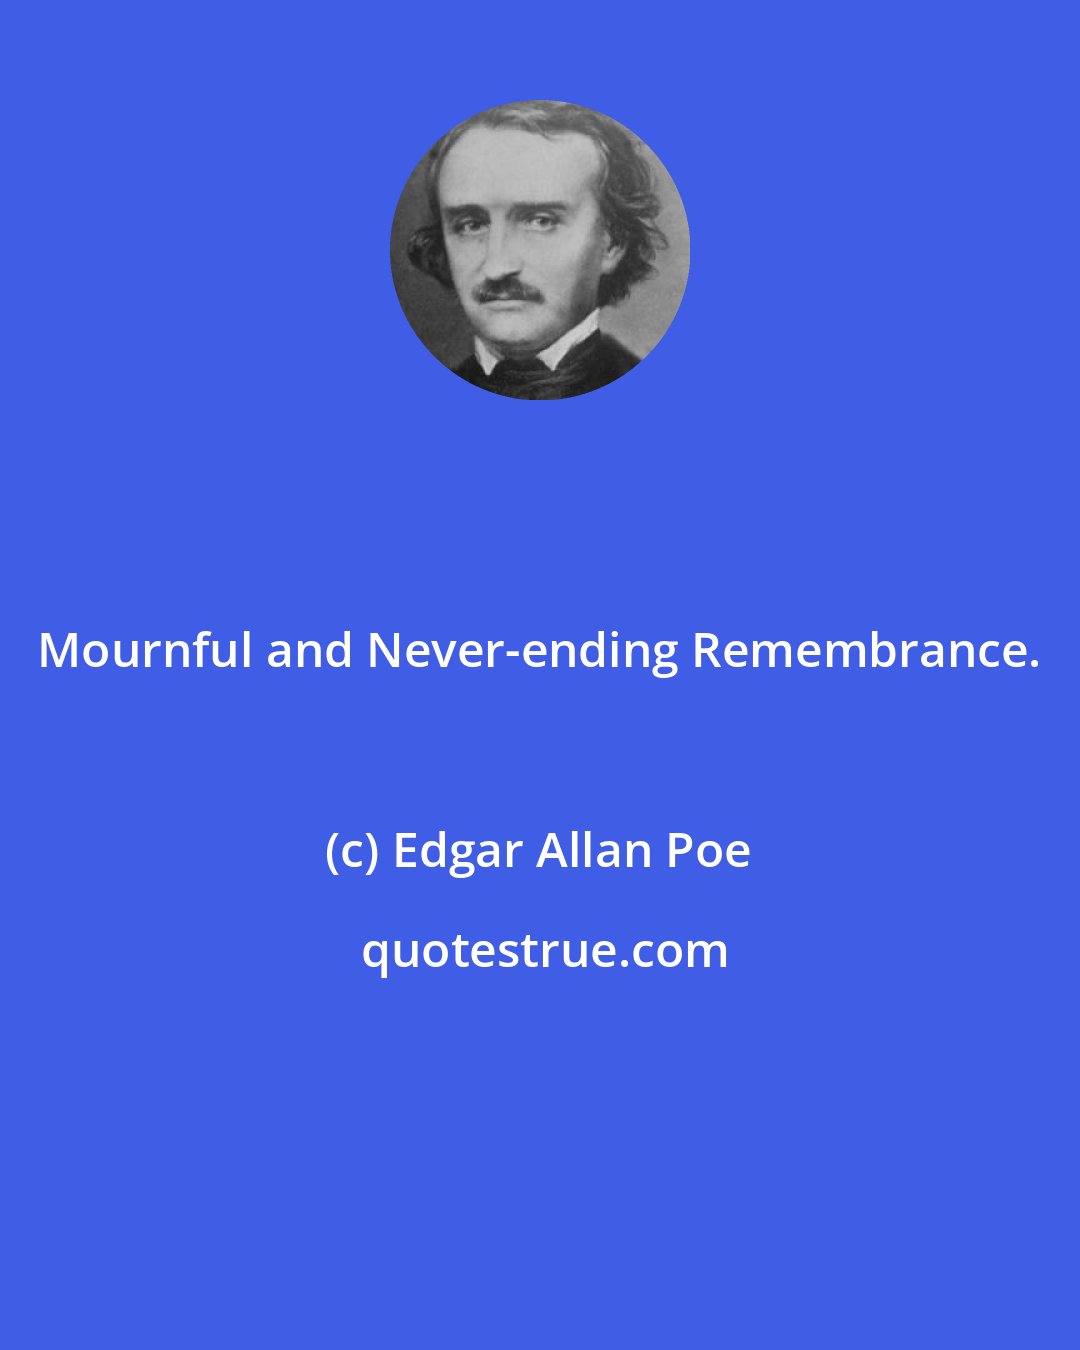 Edgar Allan Poe: Mournful and Never-ending Remembrance.